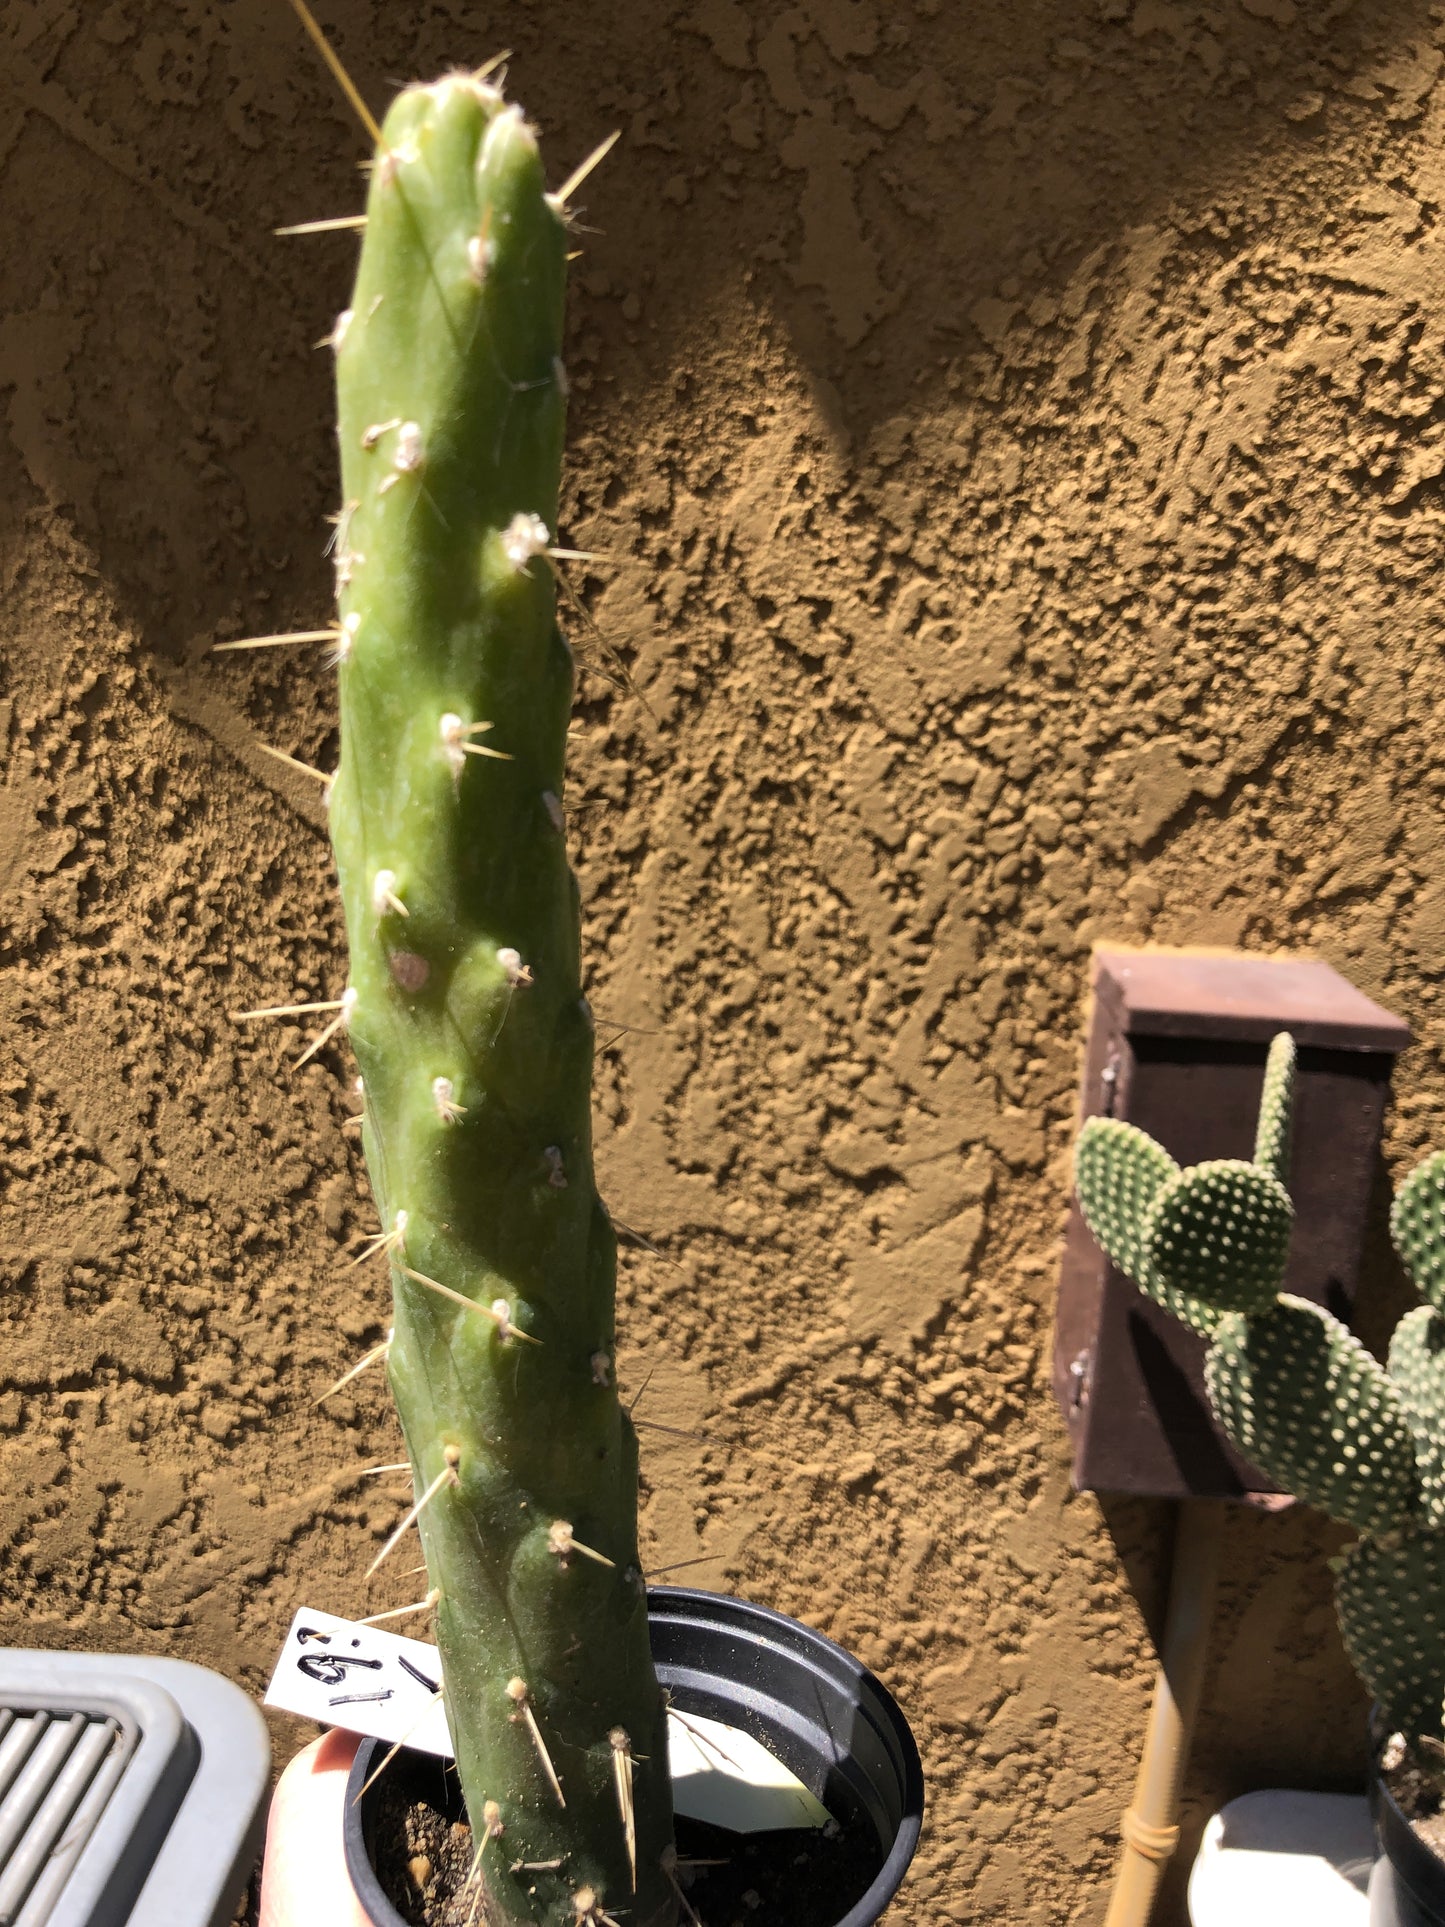 Austrocylindropuntia Full Size Eve's Needle 10.5"Tall #19Y